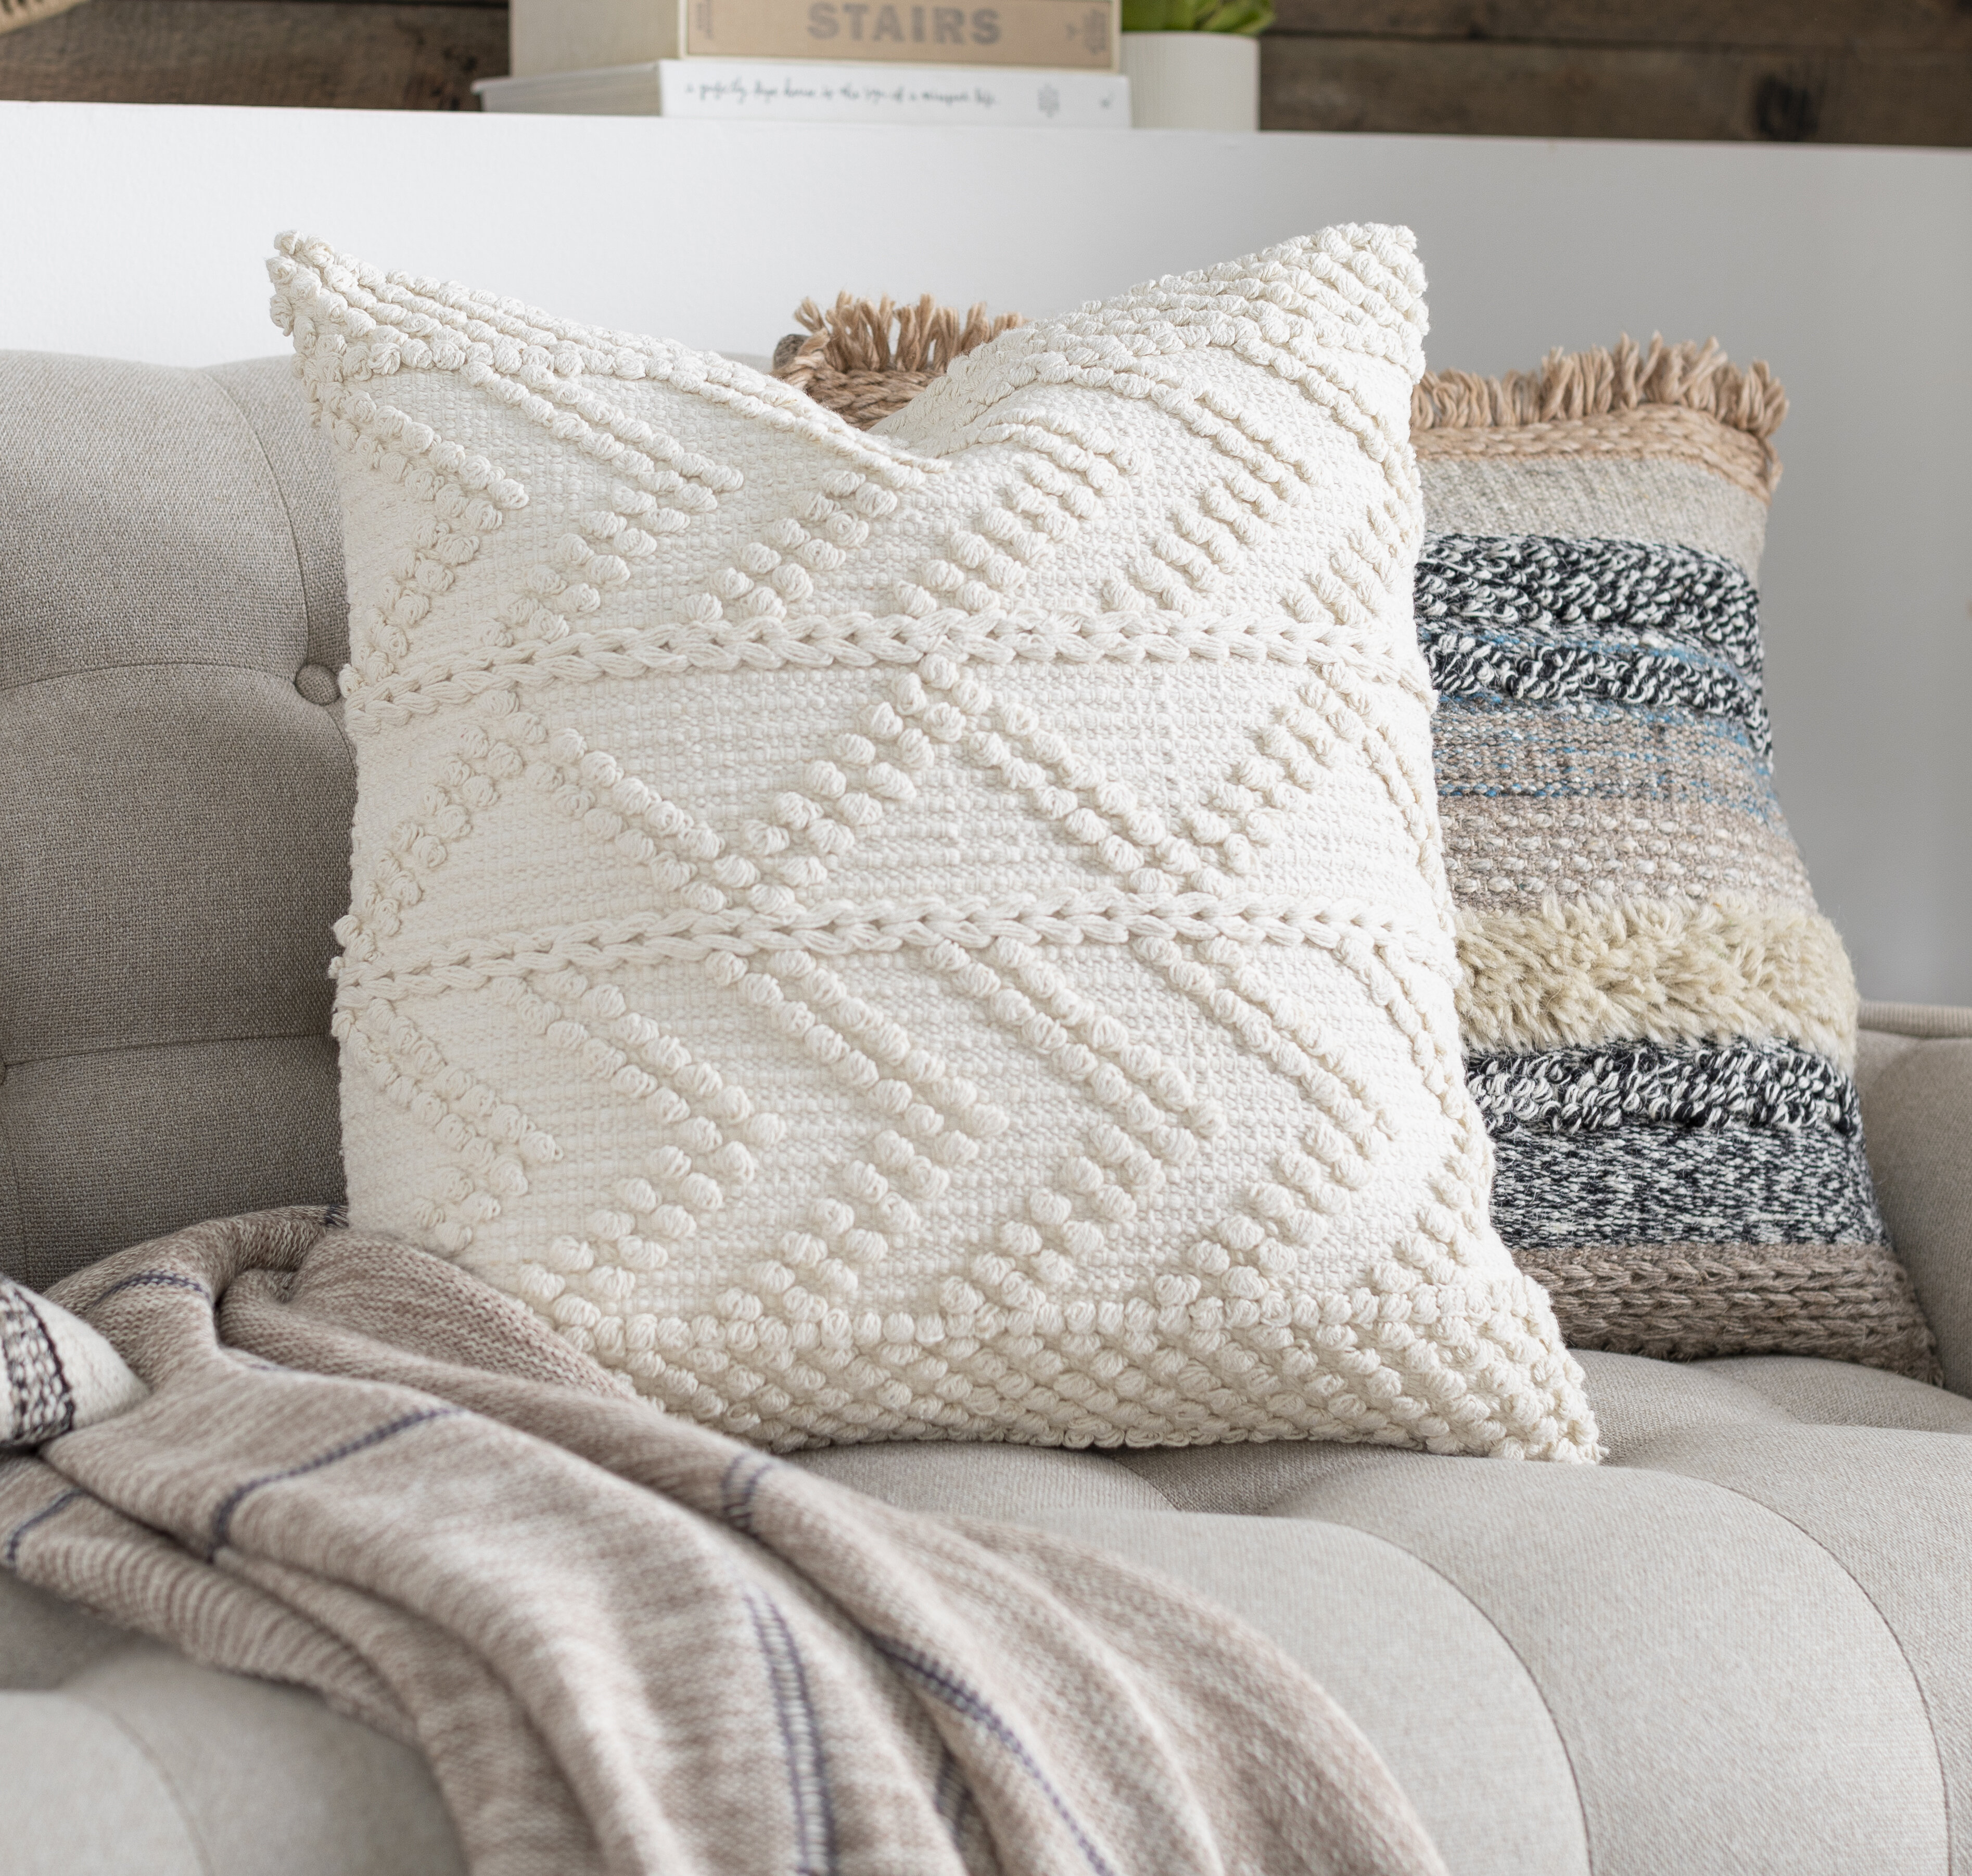 Ivory 26X26 Bree Knit Euro Throw Pillow Cover Casal Square Decorative Pillow 